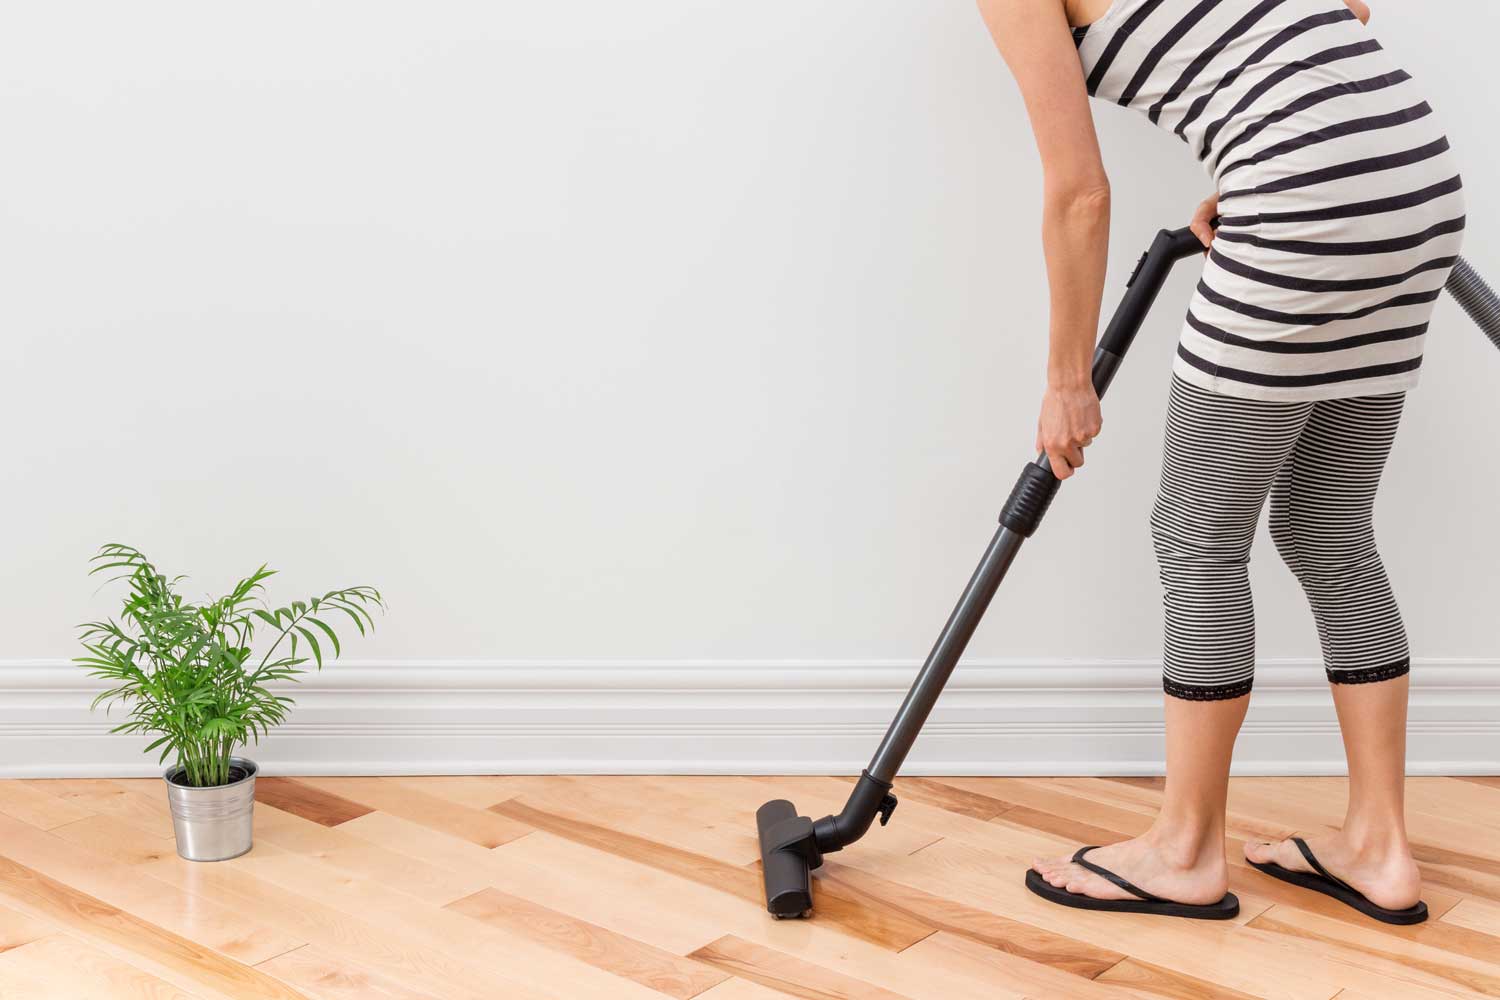 Regulary vacuum or sweep floors to remove dirt and keep your home floors looking amazing - tips from Footprints Floors in Austin.